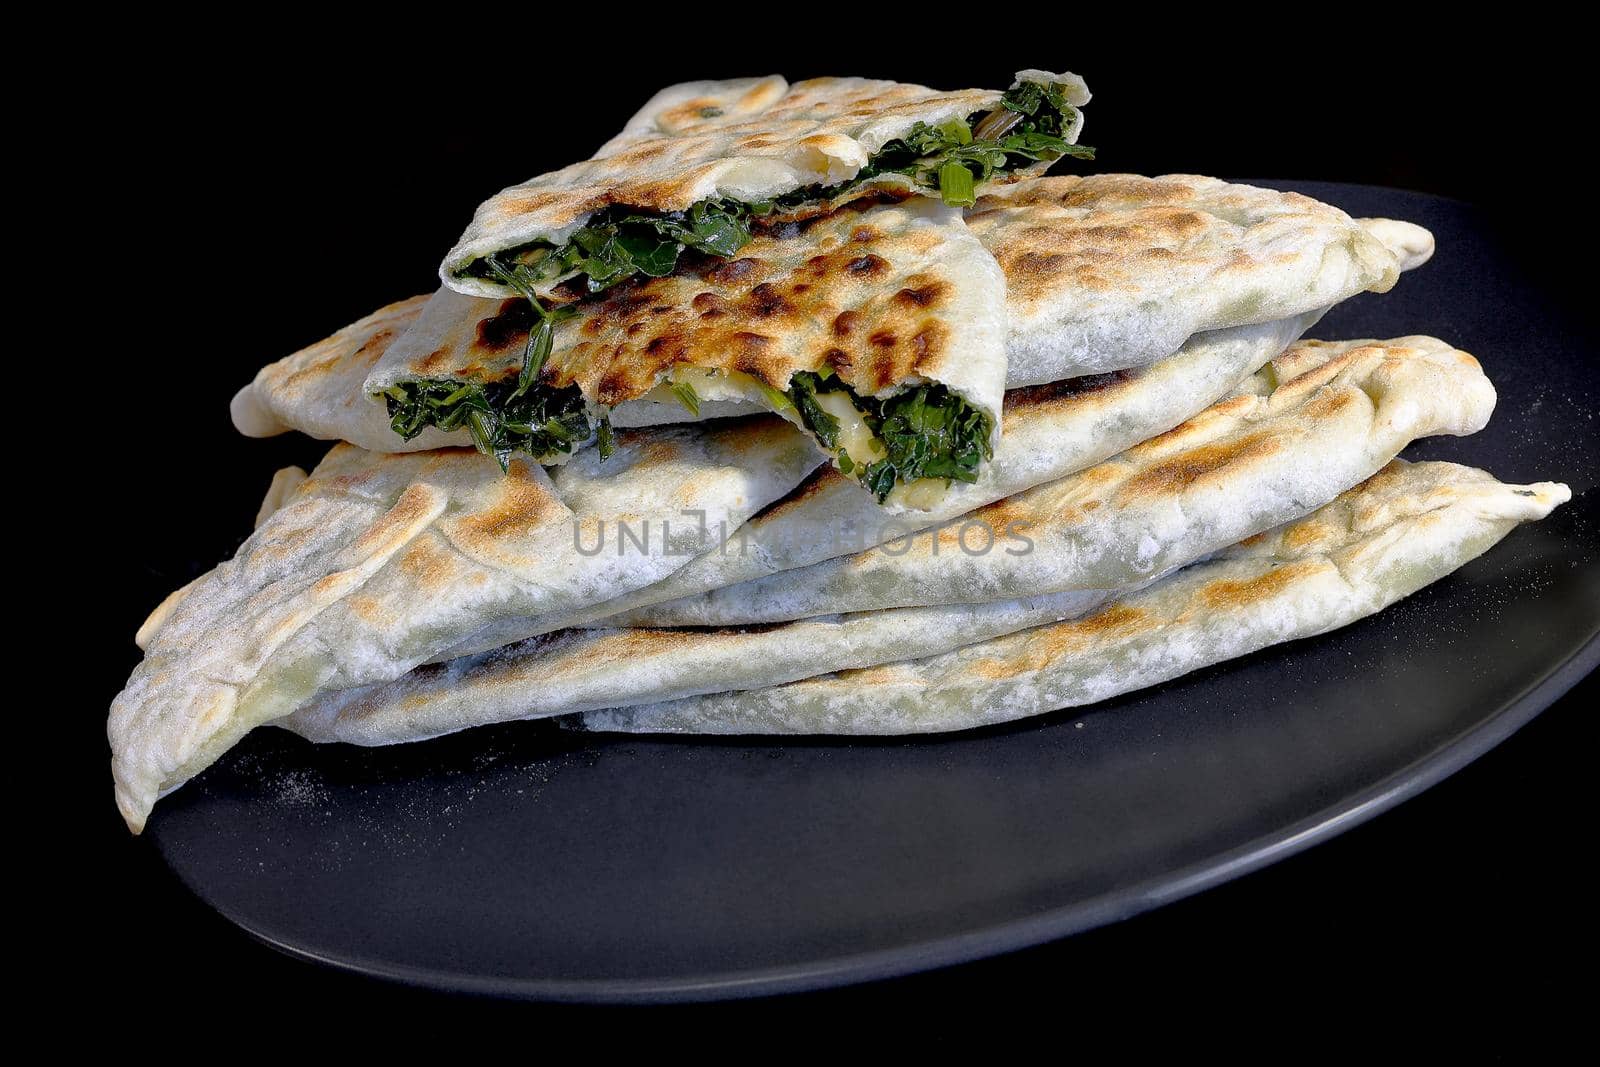 Baking of traditional Armenian food - Zhengyal bread. Bread with different greens. Cross-section of an Armenian Zhengyal bread with shallow depth of field by Proxima13